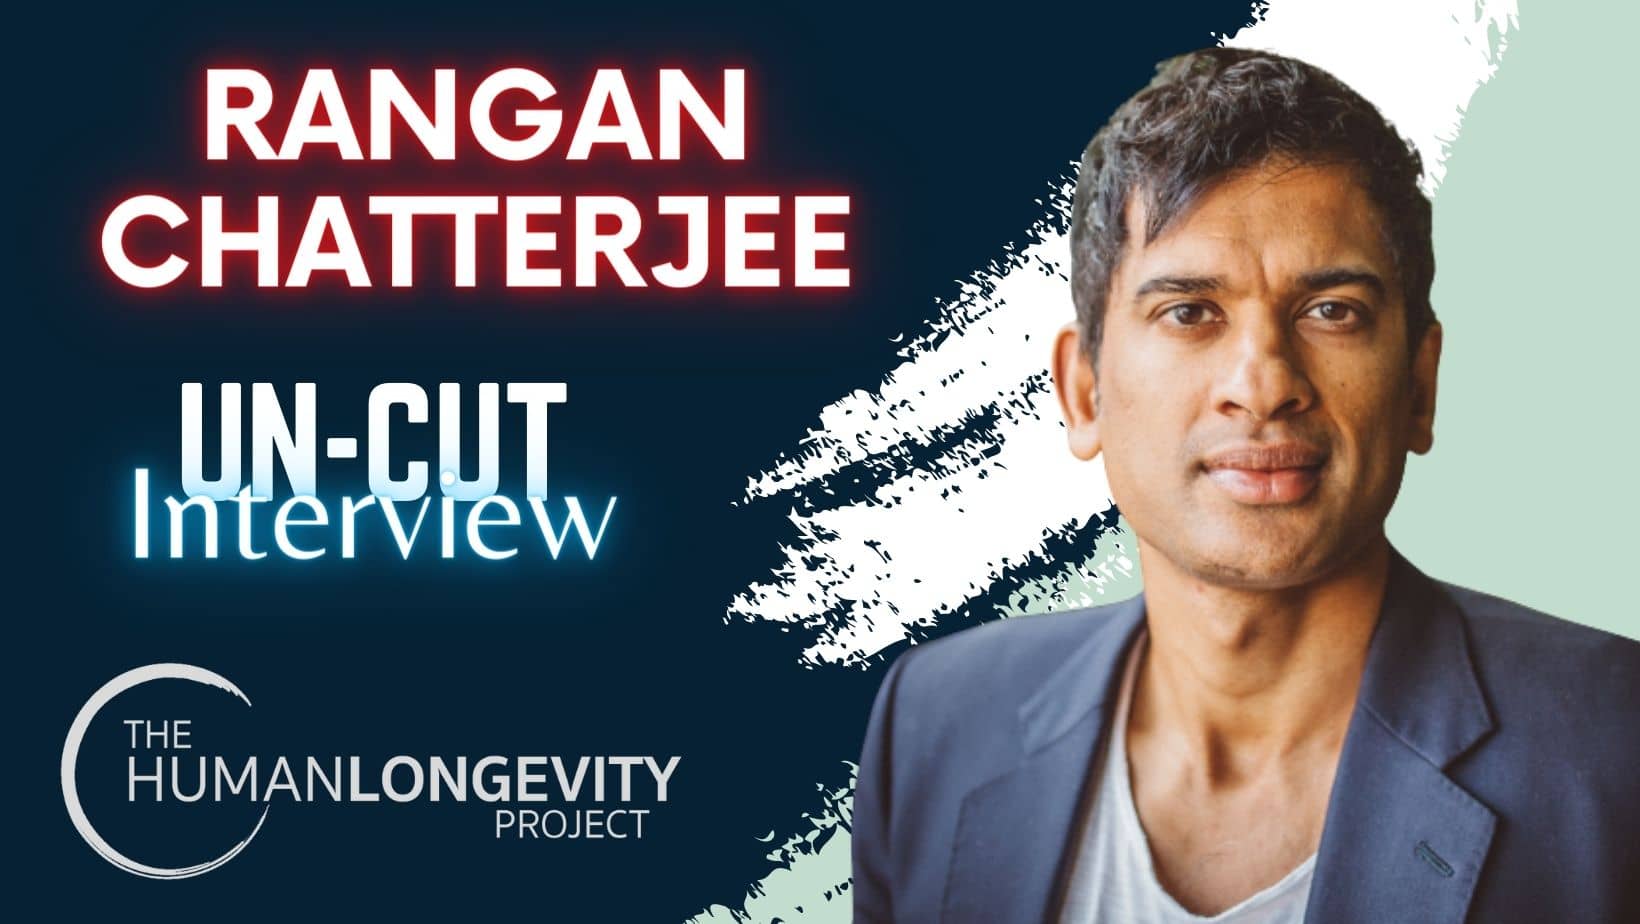 Human Longevity Project Uncut Interview With Dr. Rangan Chatterjee